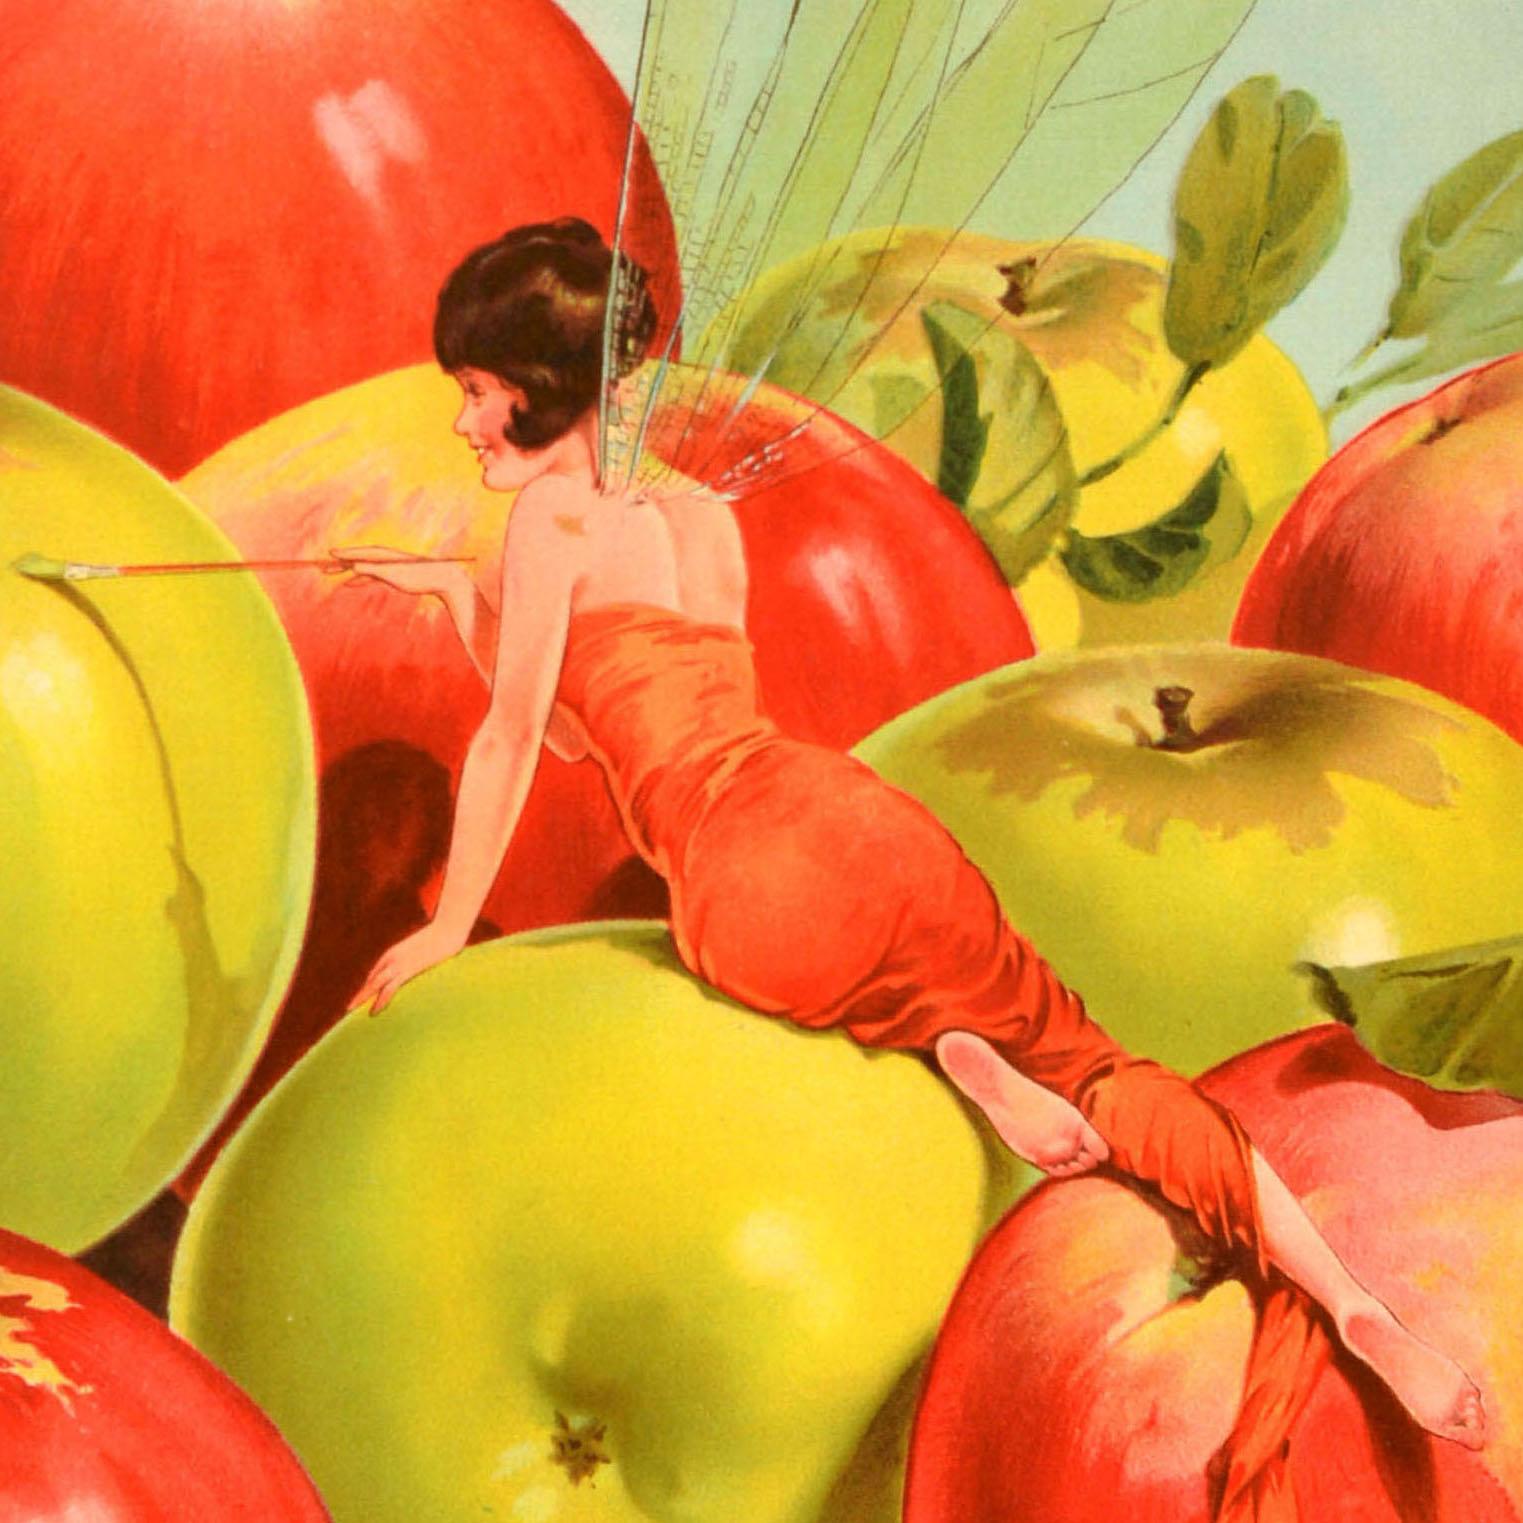 Original vintage food advertising poster - Apples The Finishing Touch to Perfect Health - featuring an illustration of fairies painting the red and green apples with the stylised lettering above the fruit on the sky background. Fair condition,